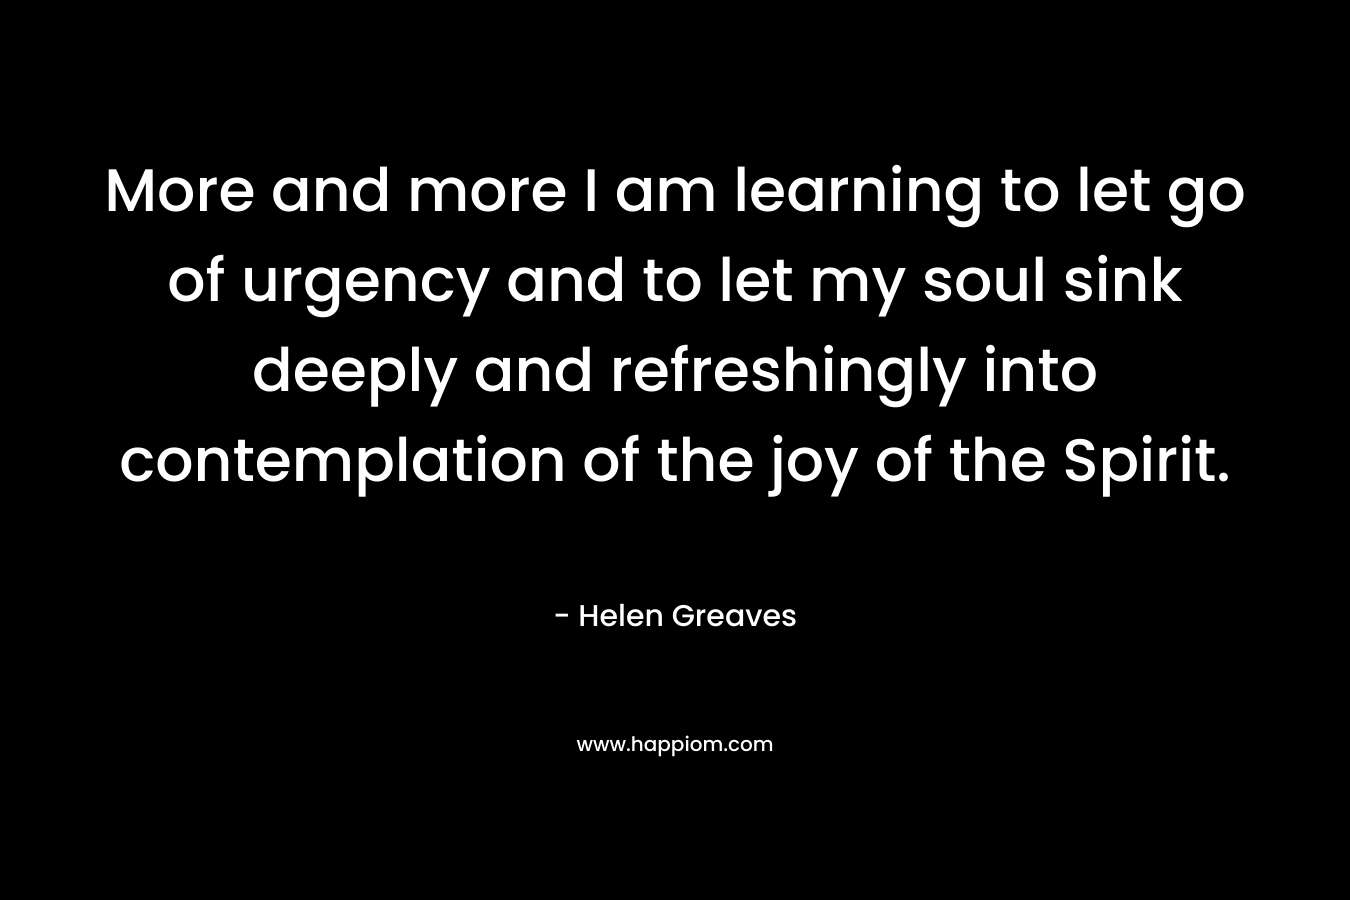 More and more I am learning to let go of urgency and to let my soul sink deeply and refreshingly into contemplation of the joy of the Spirit.